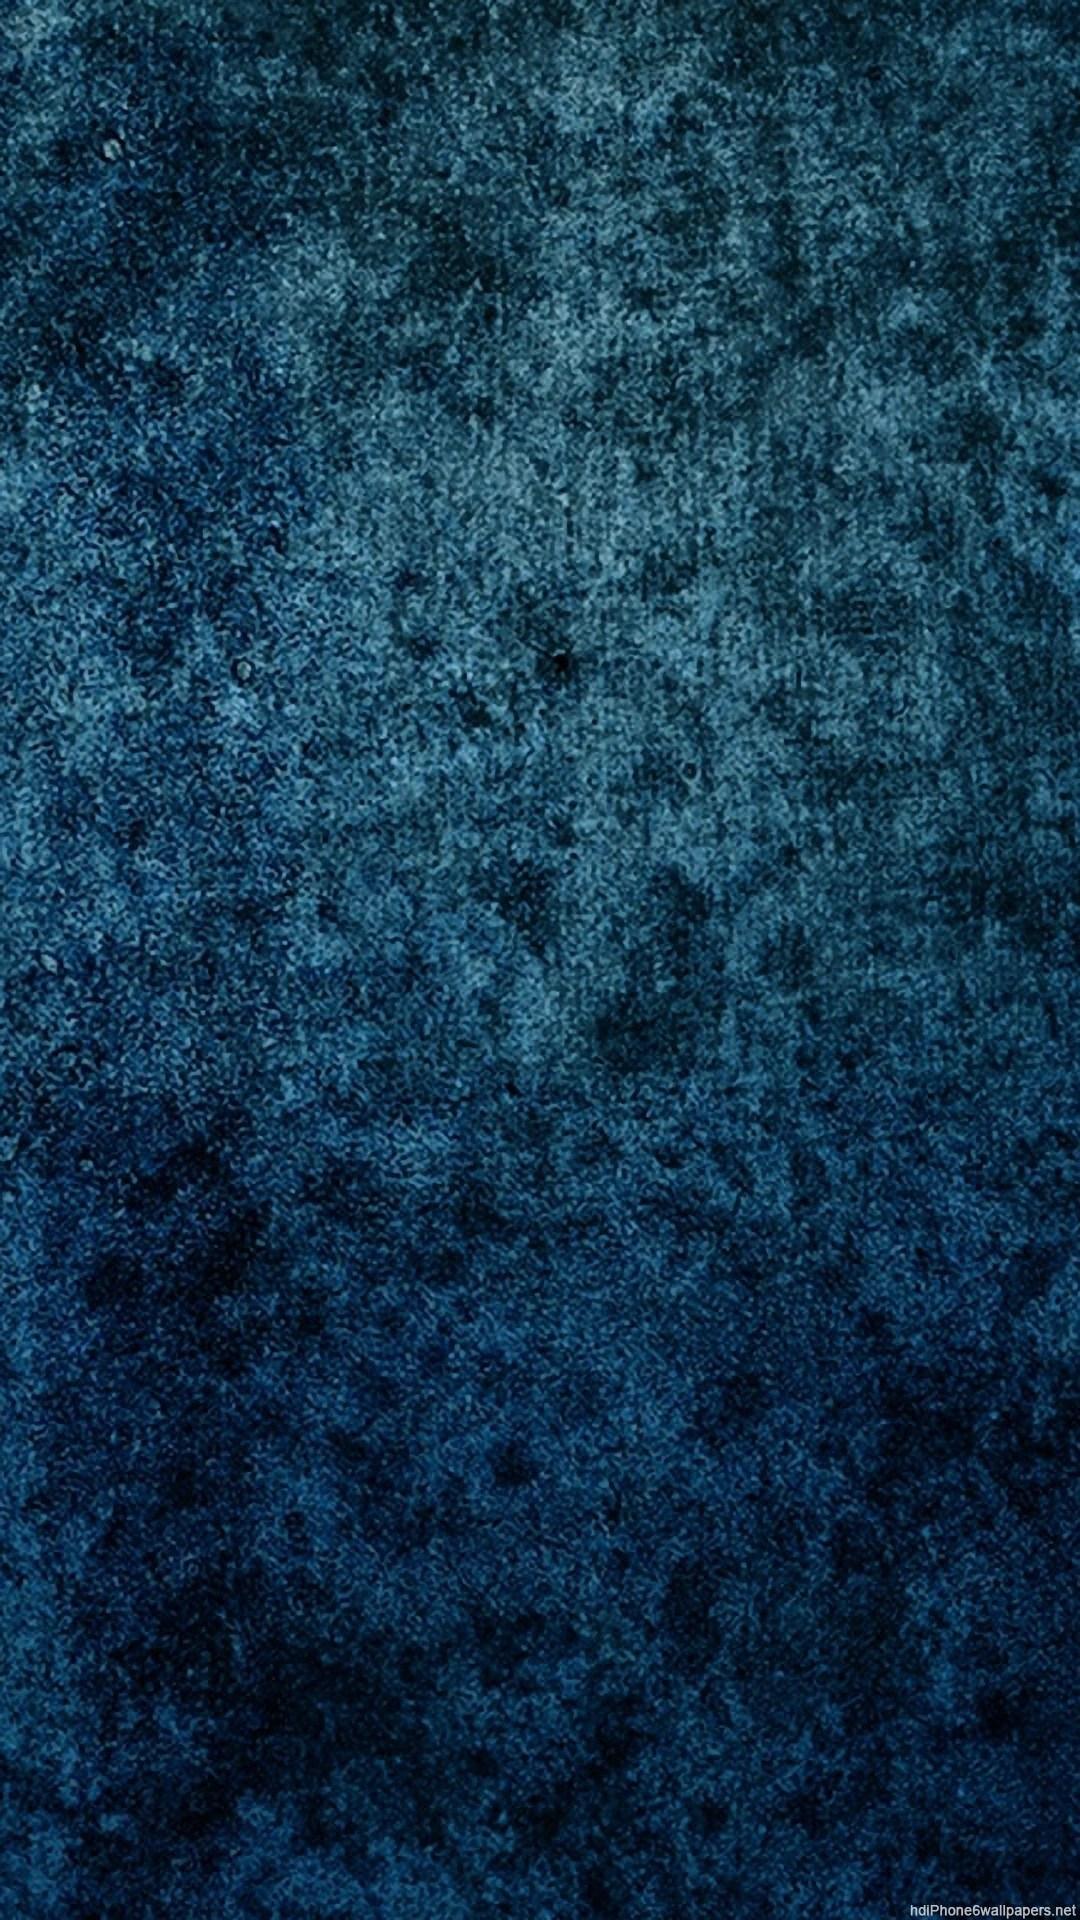 hd wallpapers for iphone 6 1080p,blue,aqua,turquoise,green,teal